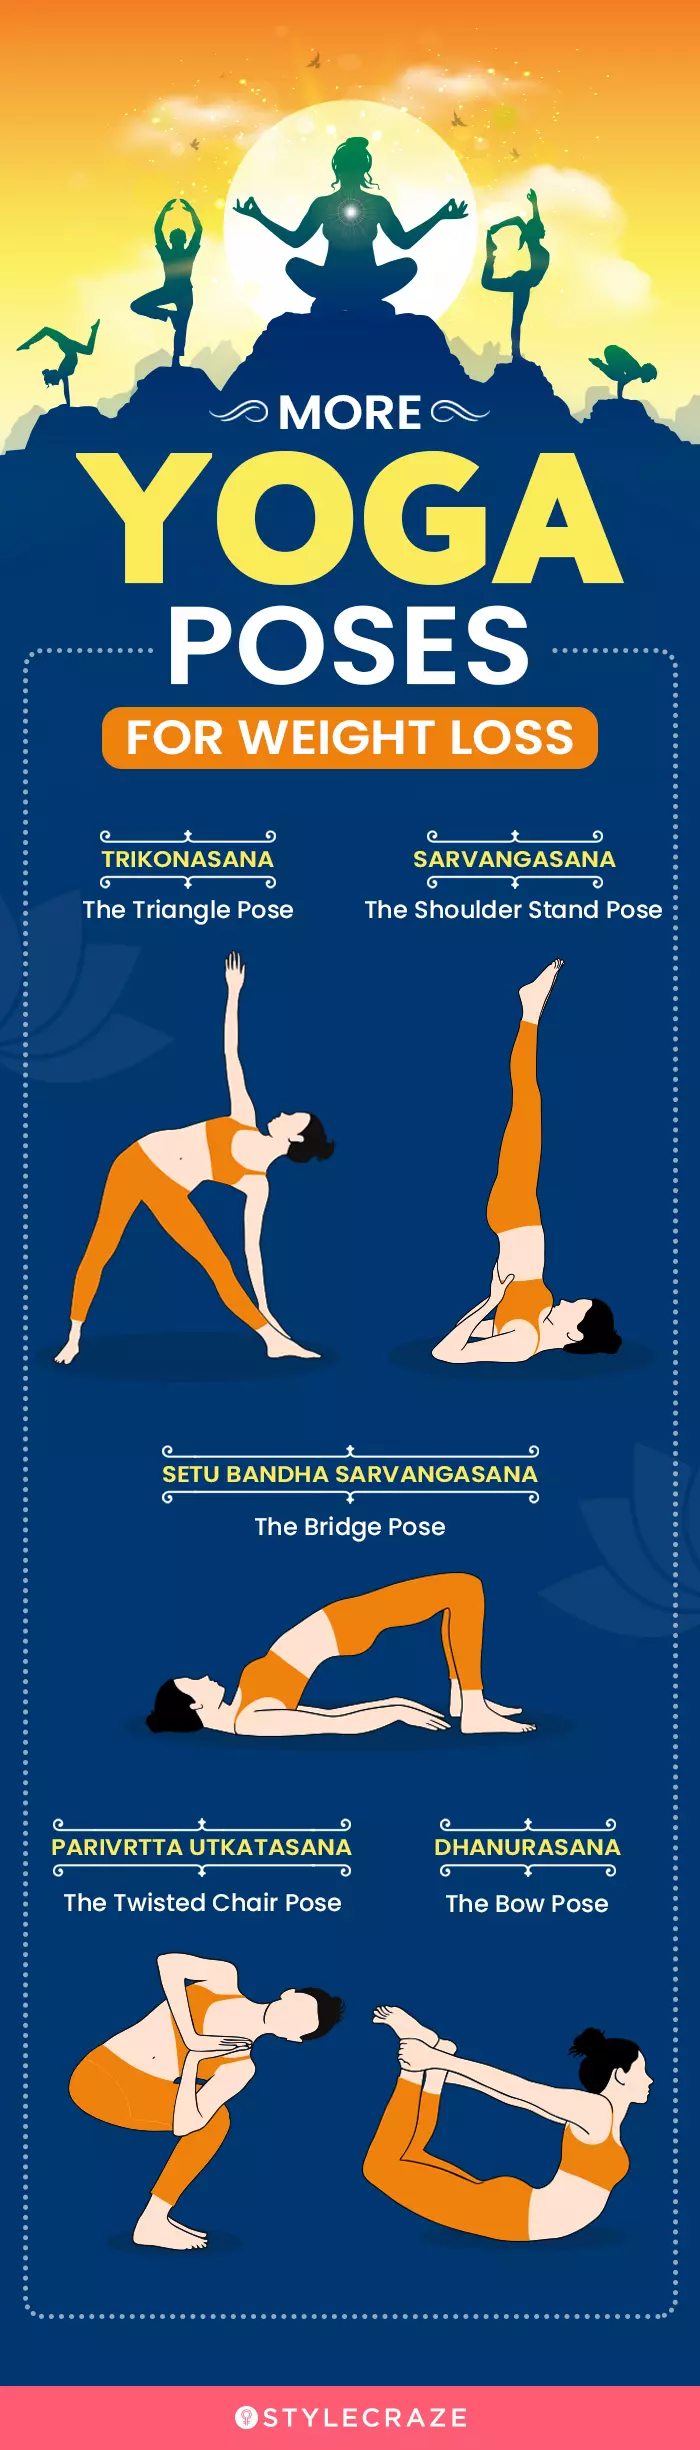 more yoga poses for weight loss (infographic)